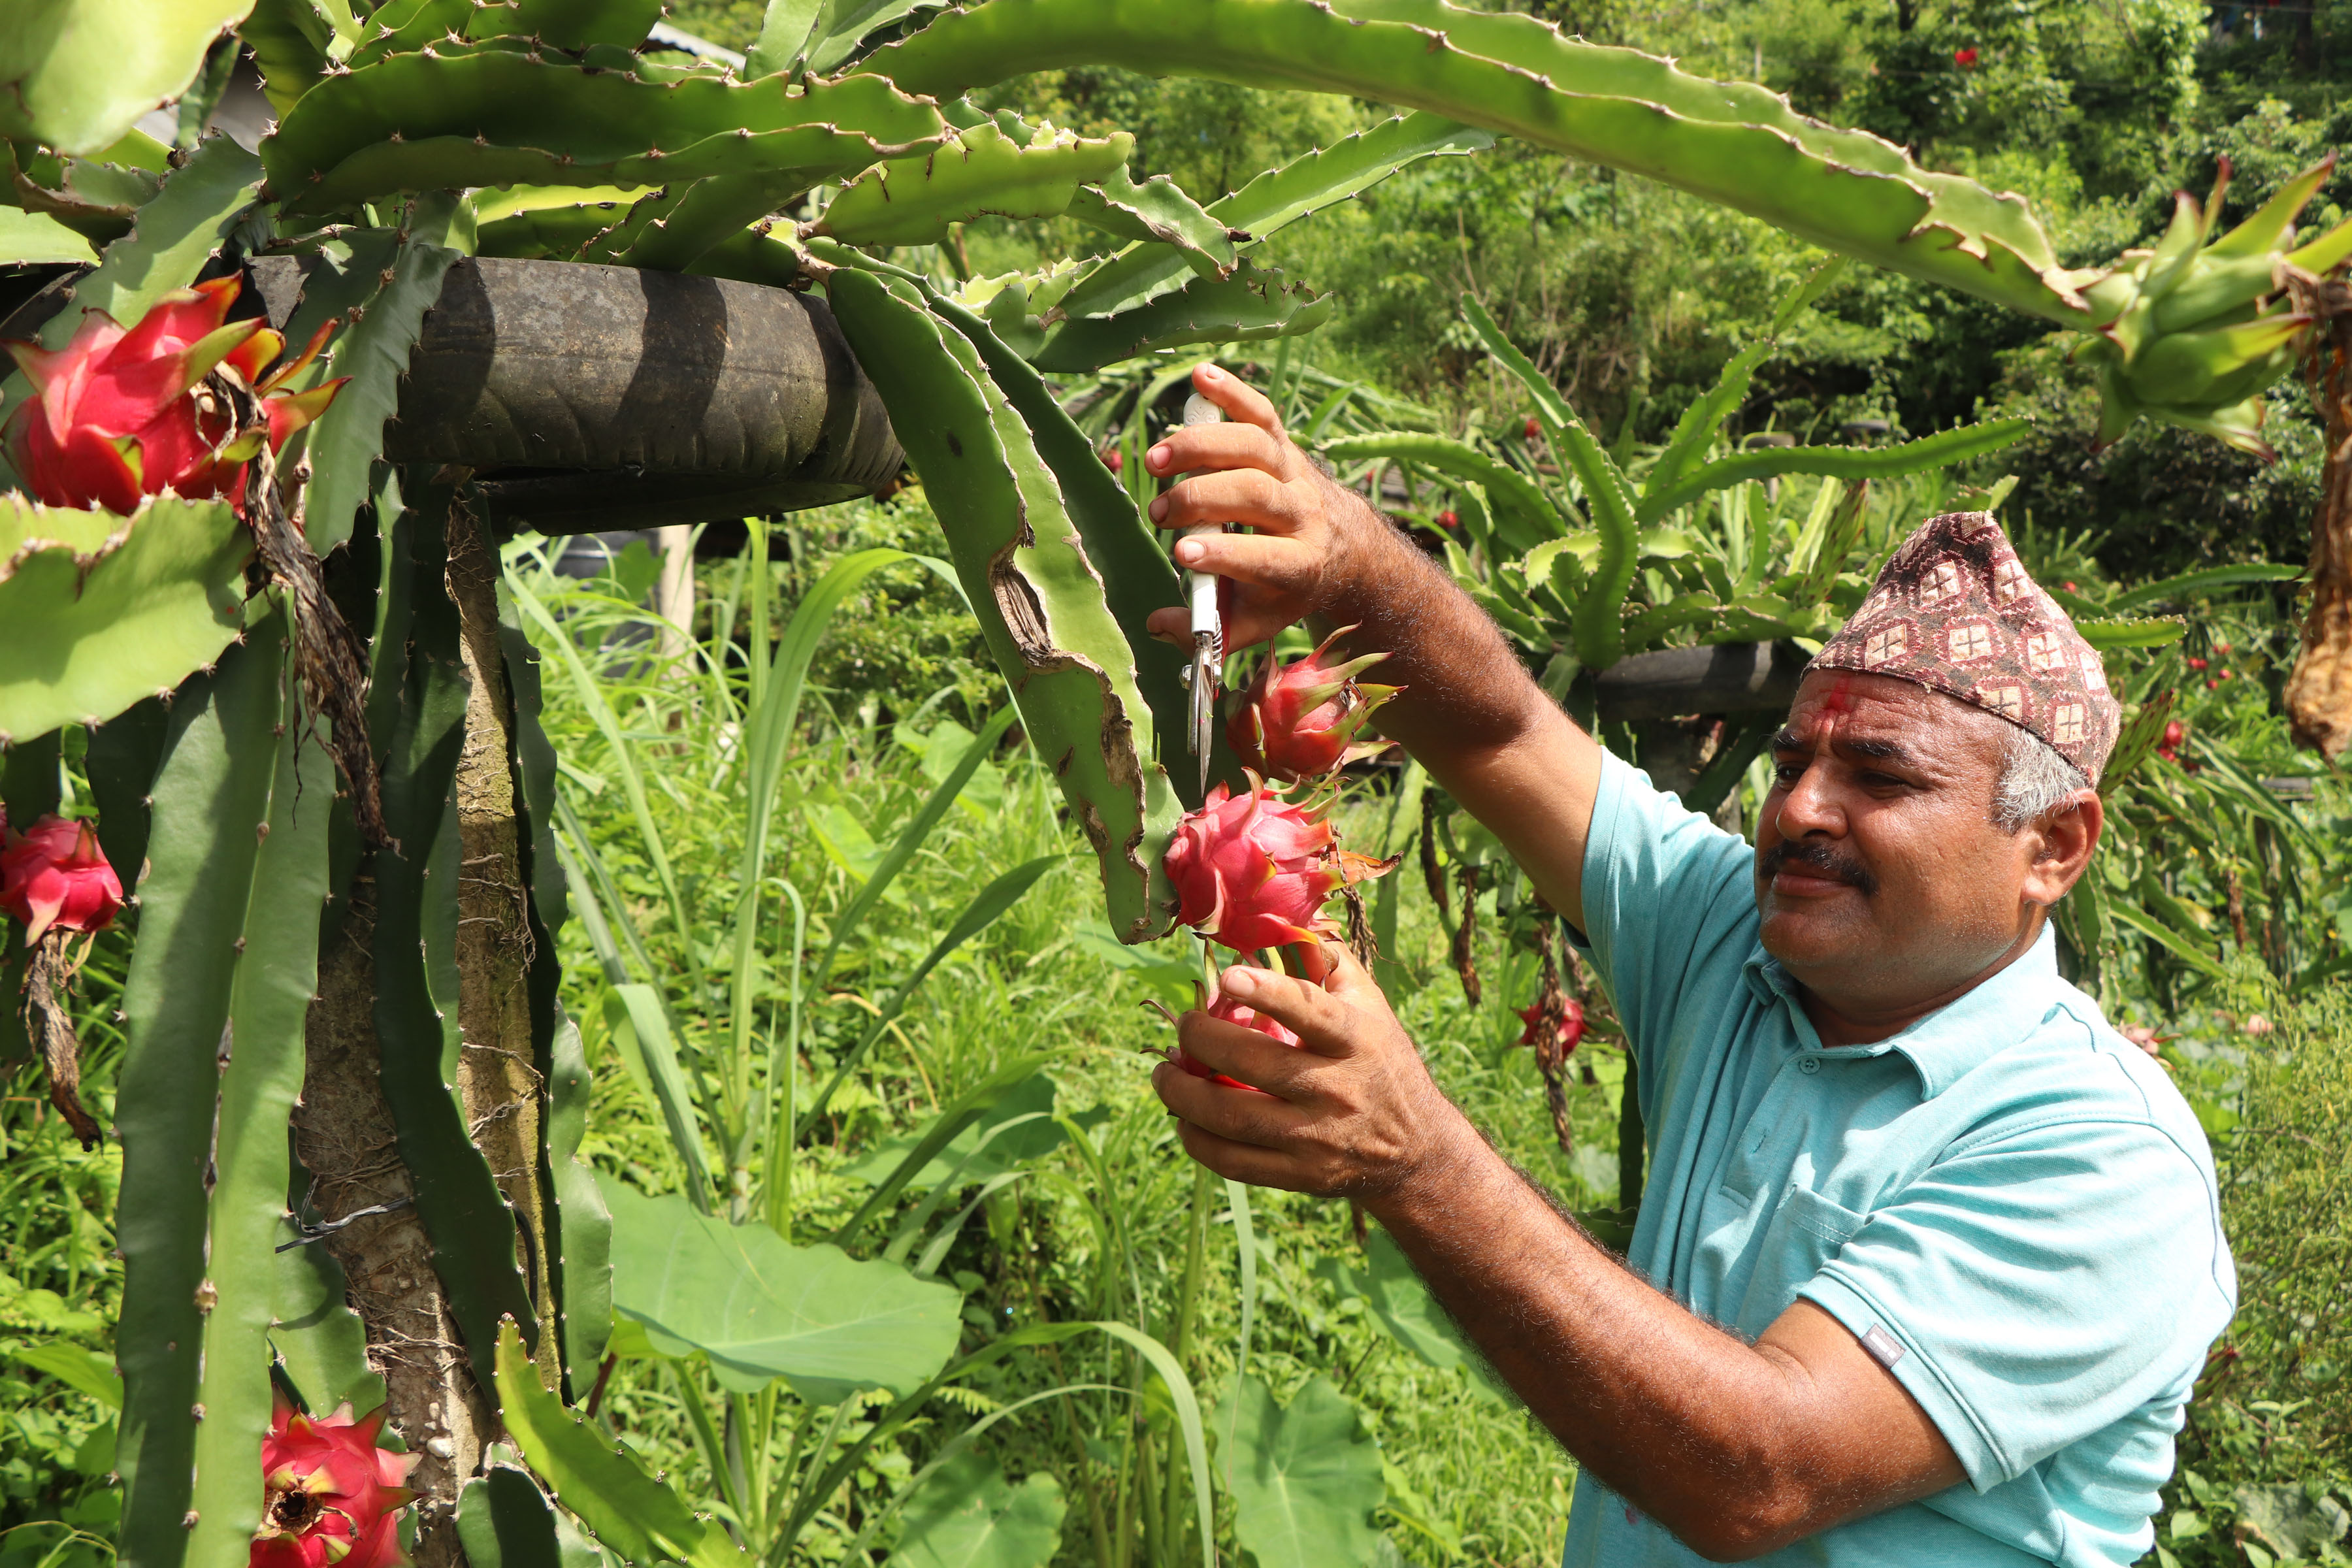 Youth of Sindhuli into commercial dragon fruit farming